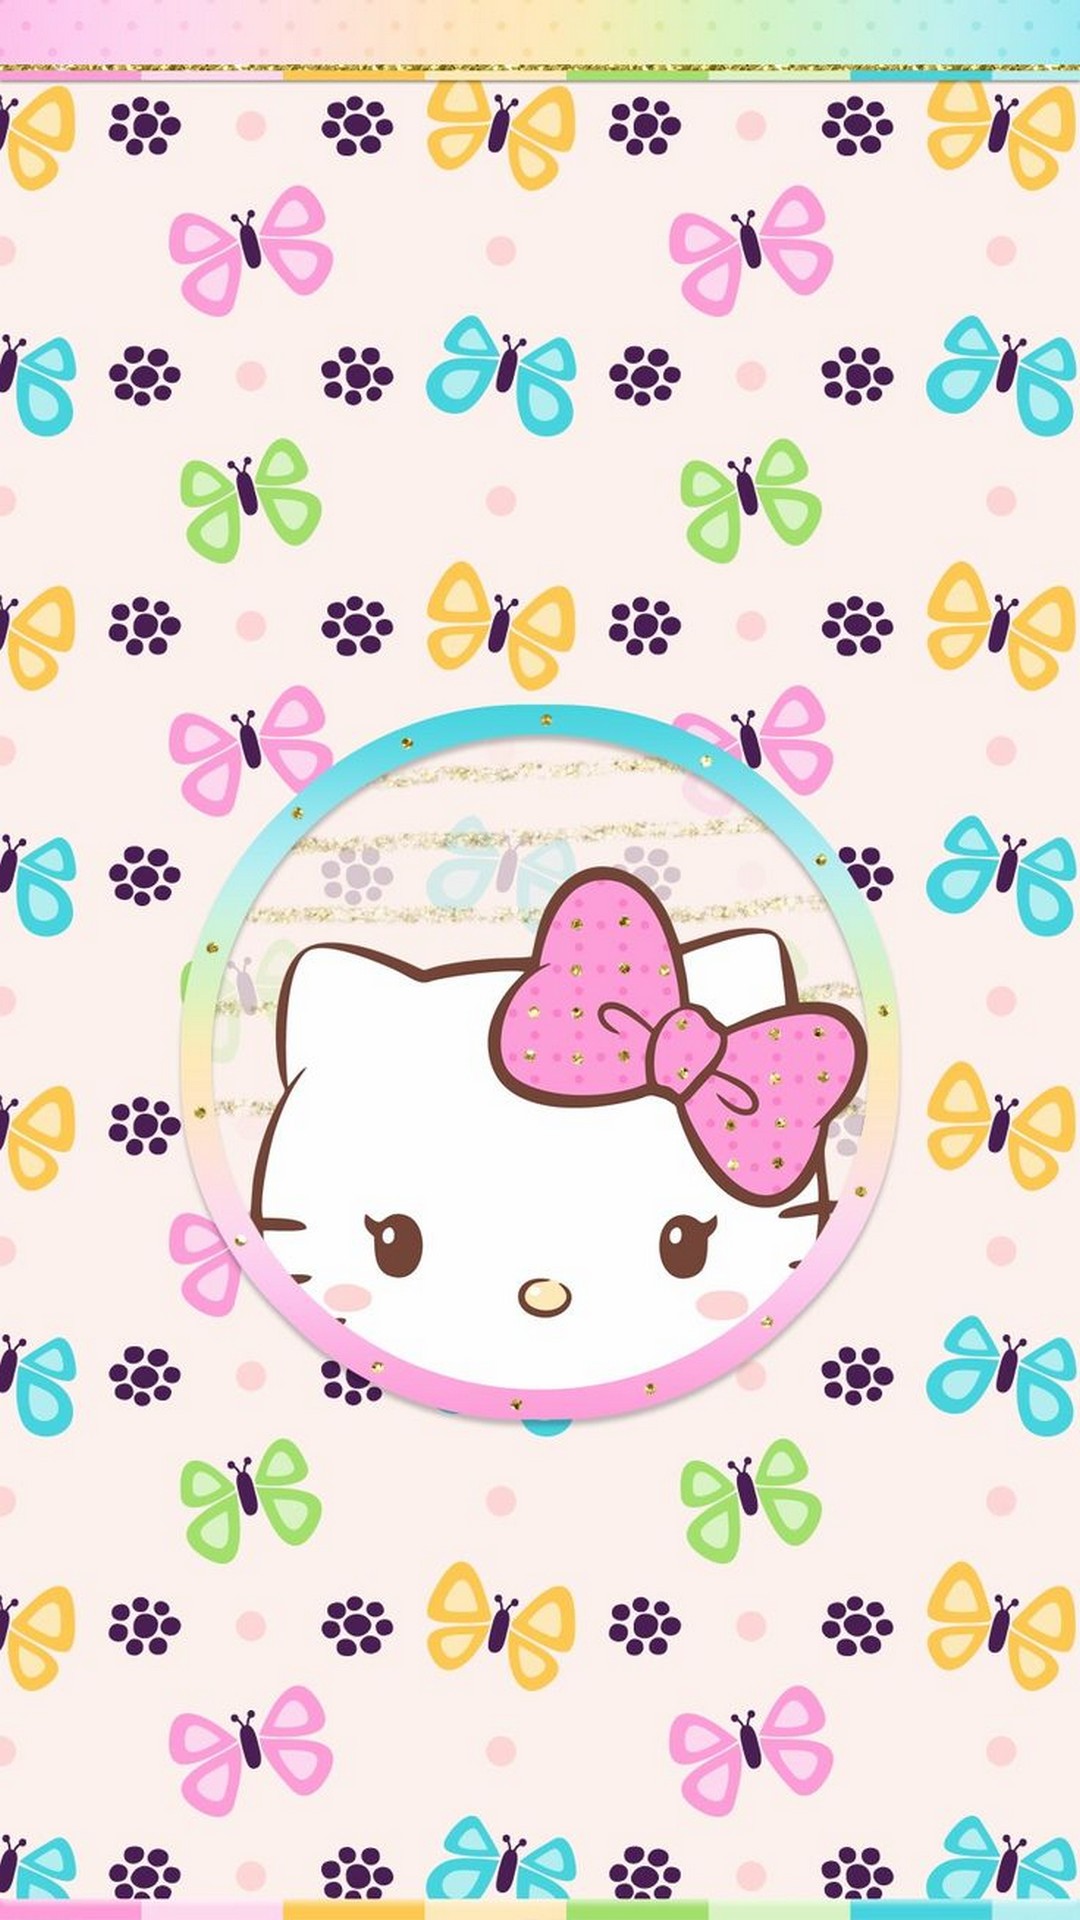 Hello Kitty HD Wallpaper For iPhone with image resolution 1080x1920 pixel. You can use this wallpaper as background for your desktop Computer Screensavers, Android or iPhone smartphones